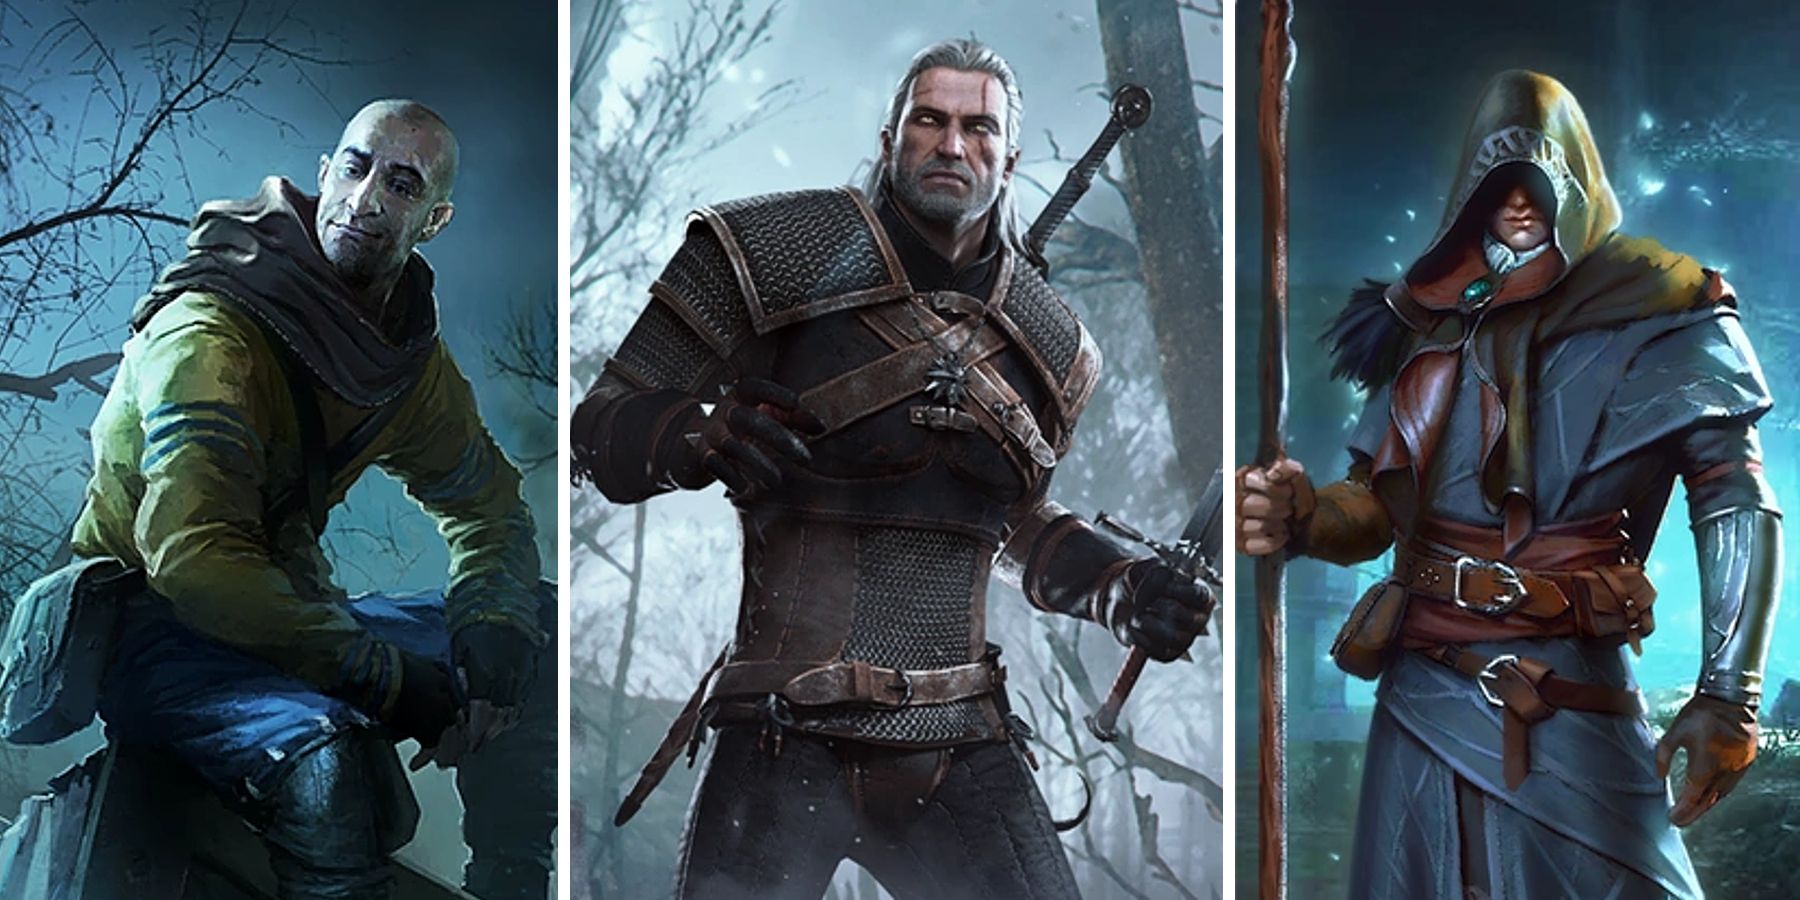 The Witcher 3 Gaunter O'Dimm Geralt of Rivia Avallac'h